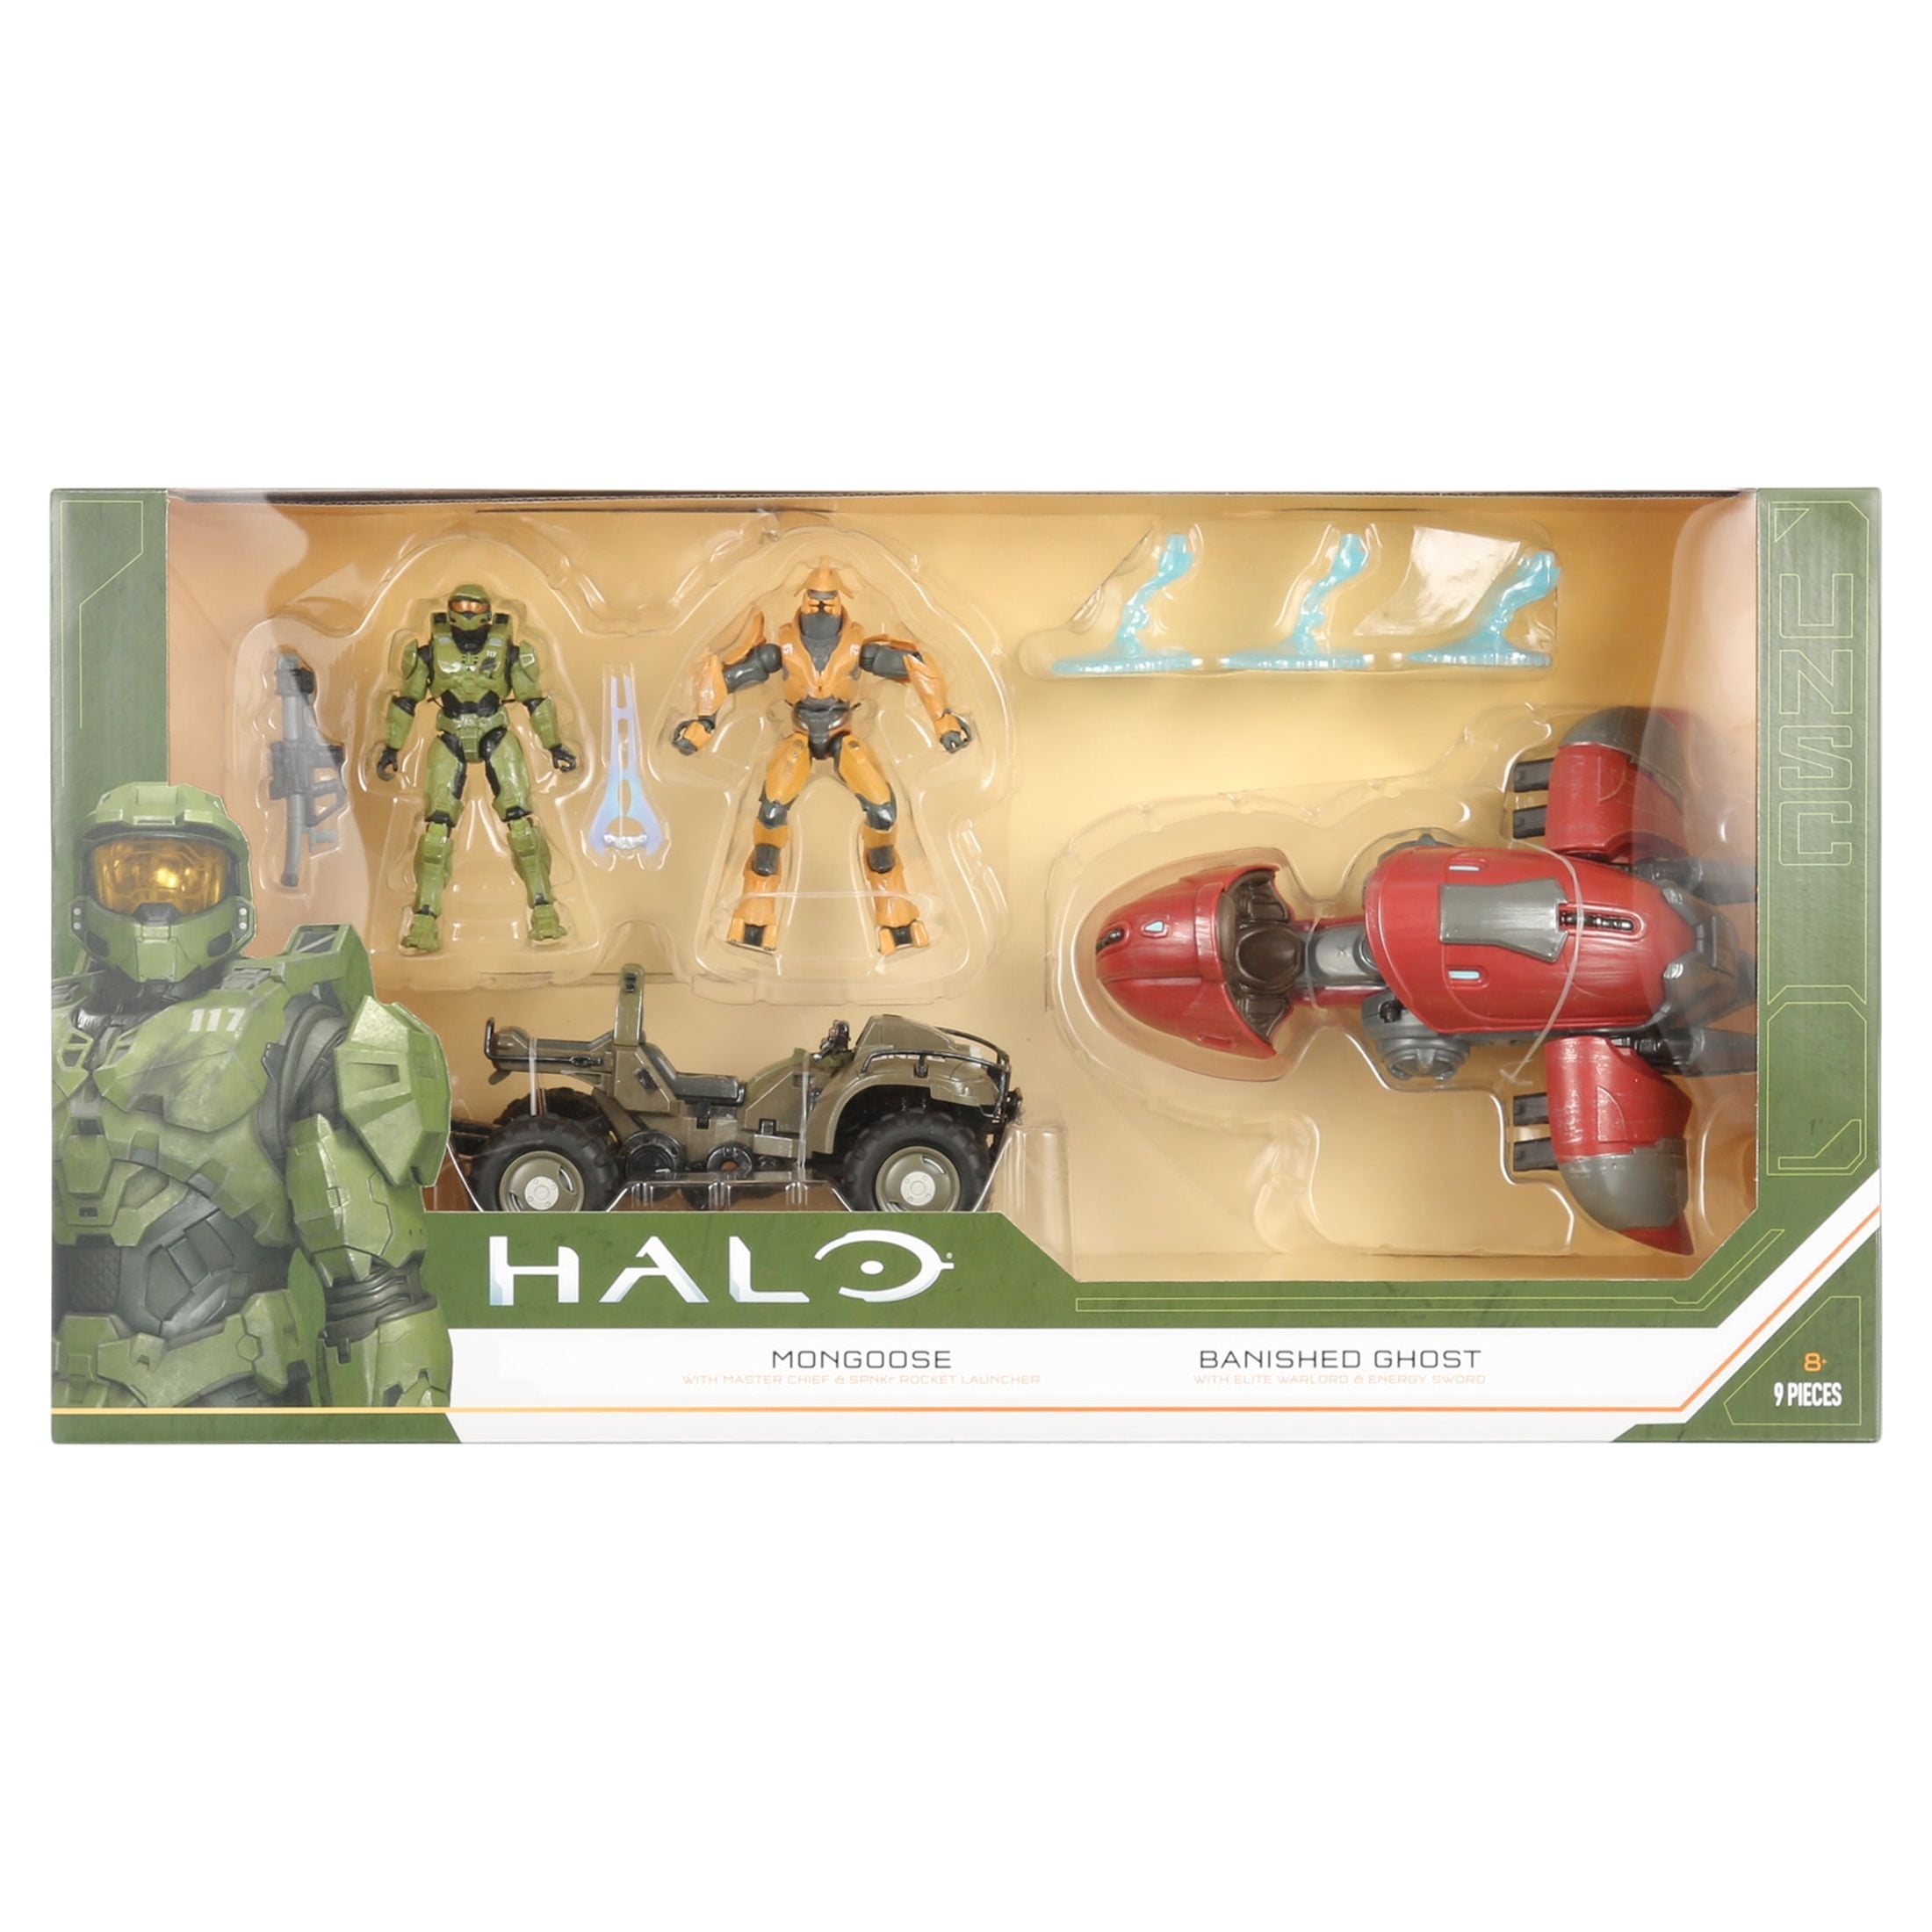 Halo 5 Halo Infinite Mongoose with Master Chief & Banished Ghost with Elite Warlord Action Figure Set